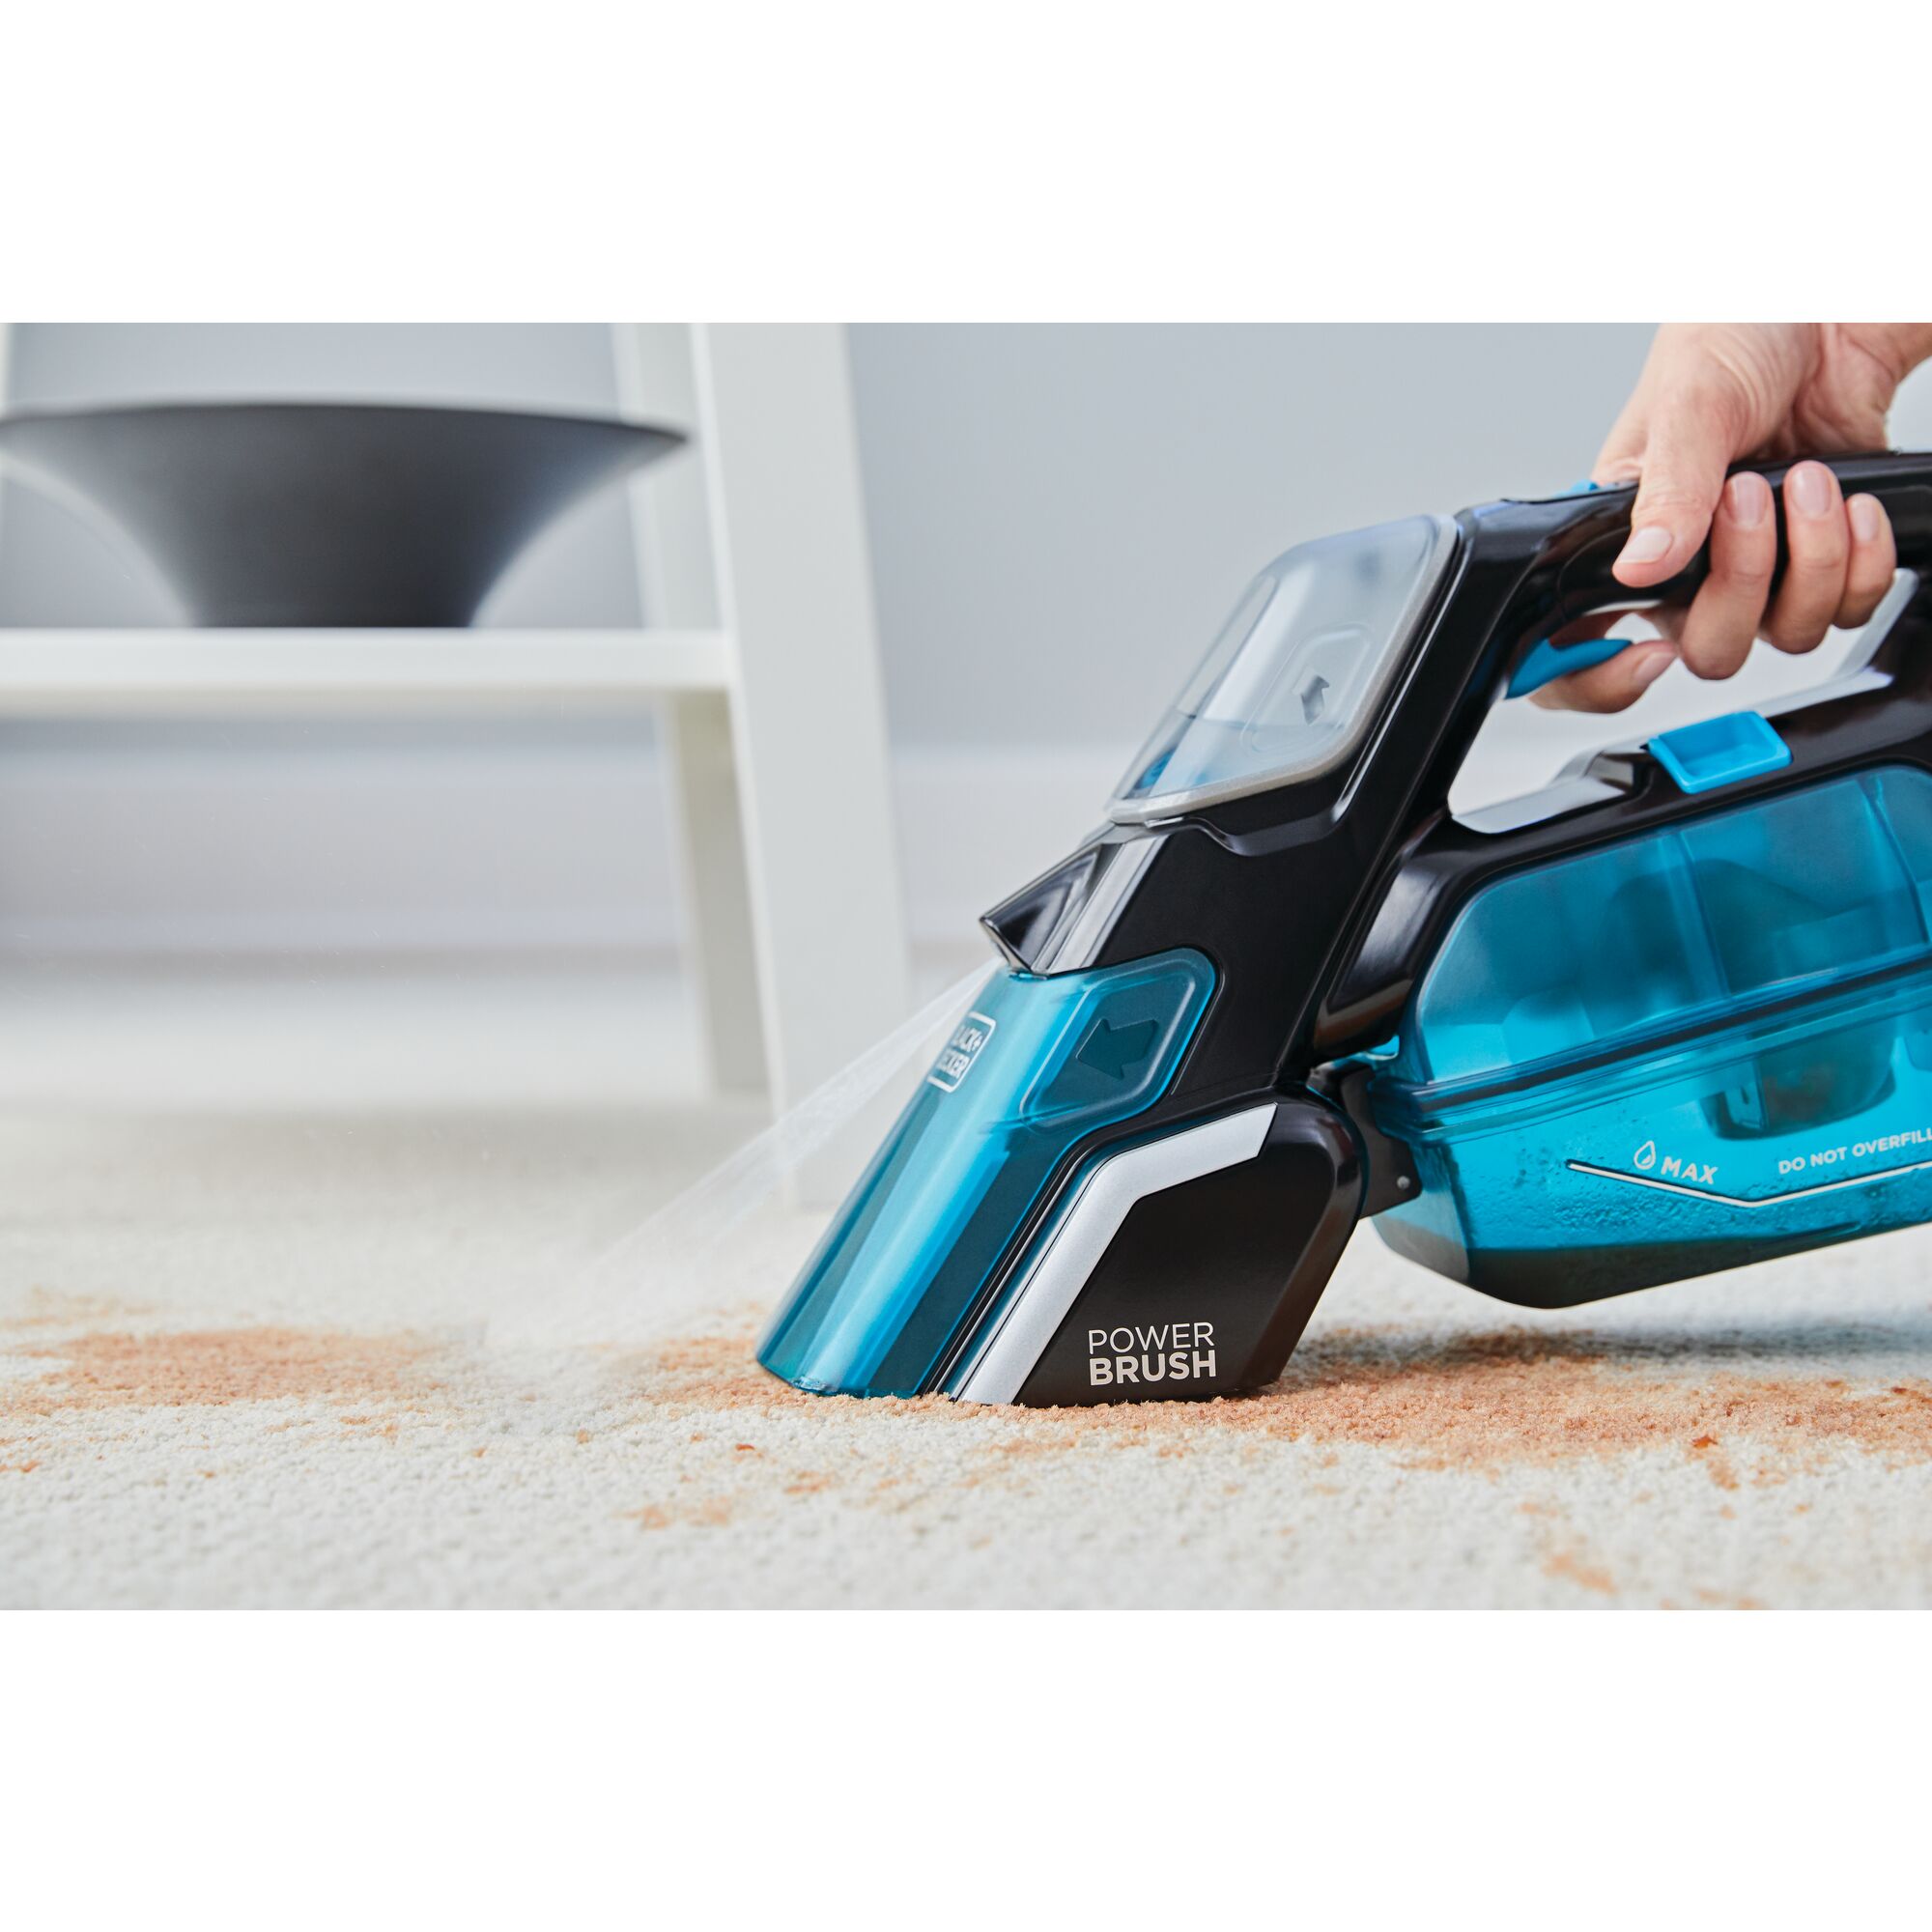 Spillbuster Cordless Spill plus Spot Cleaner with Powered Scrub Brush being used to scrub stains from carpet.